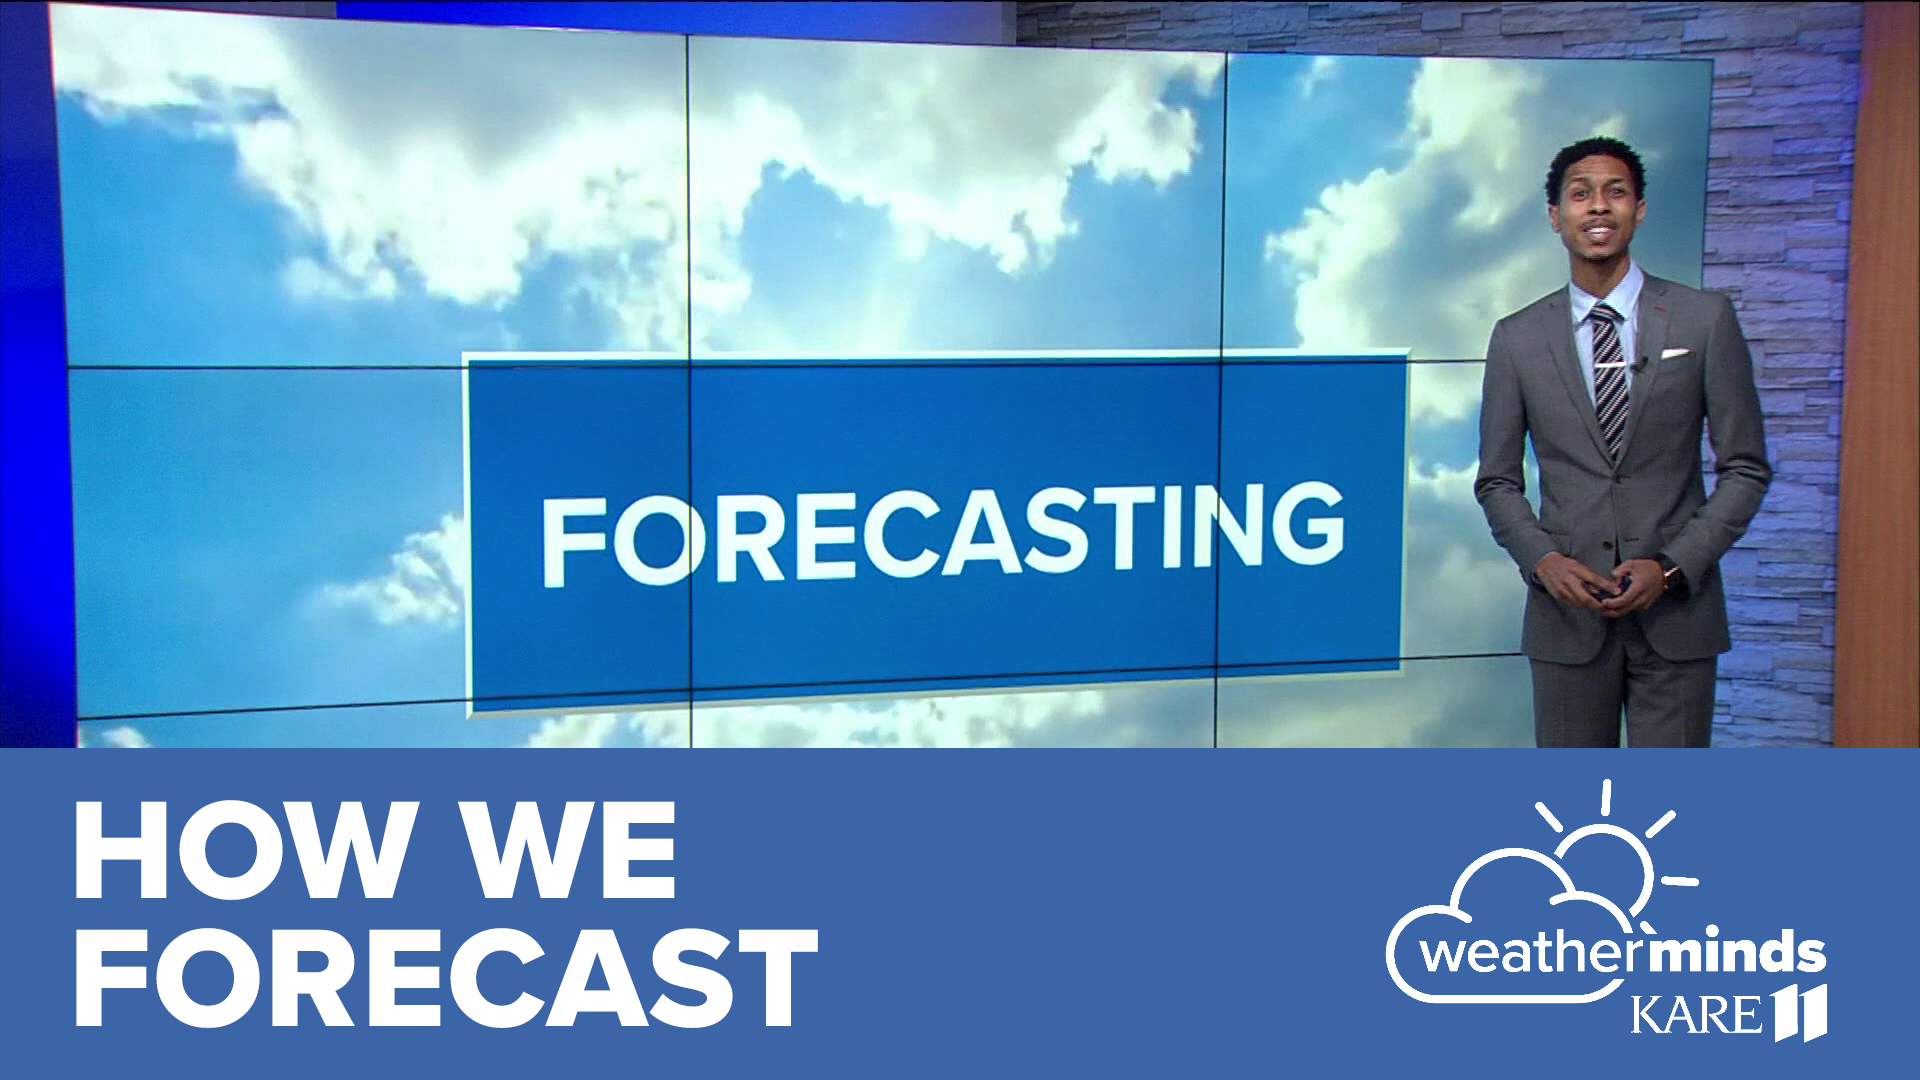 A meteorologist’s main job is to forecast the weather of course! Here’s a look at what tools we use to do just that. Plus, observing weather at home and at school.